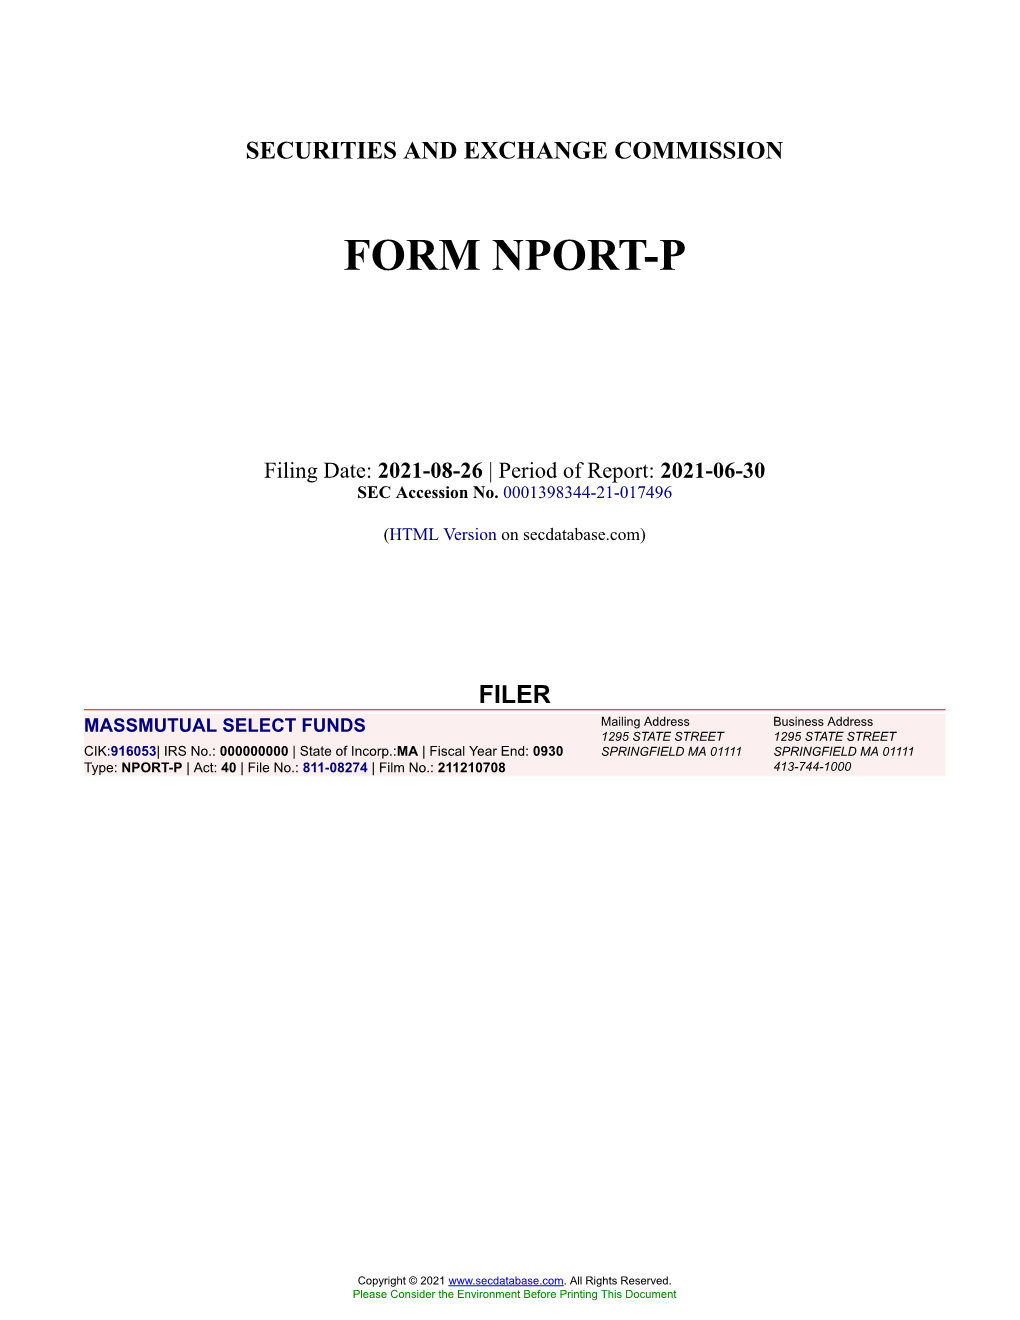 MASSMUTUAL SELECT FUNDS Form NPORT-P Filed 2021-08-26